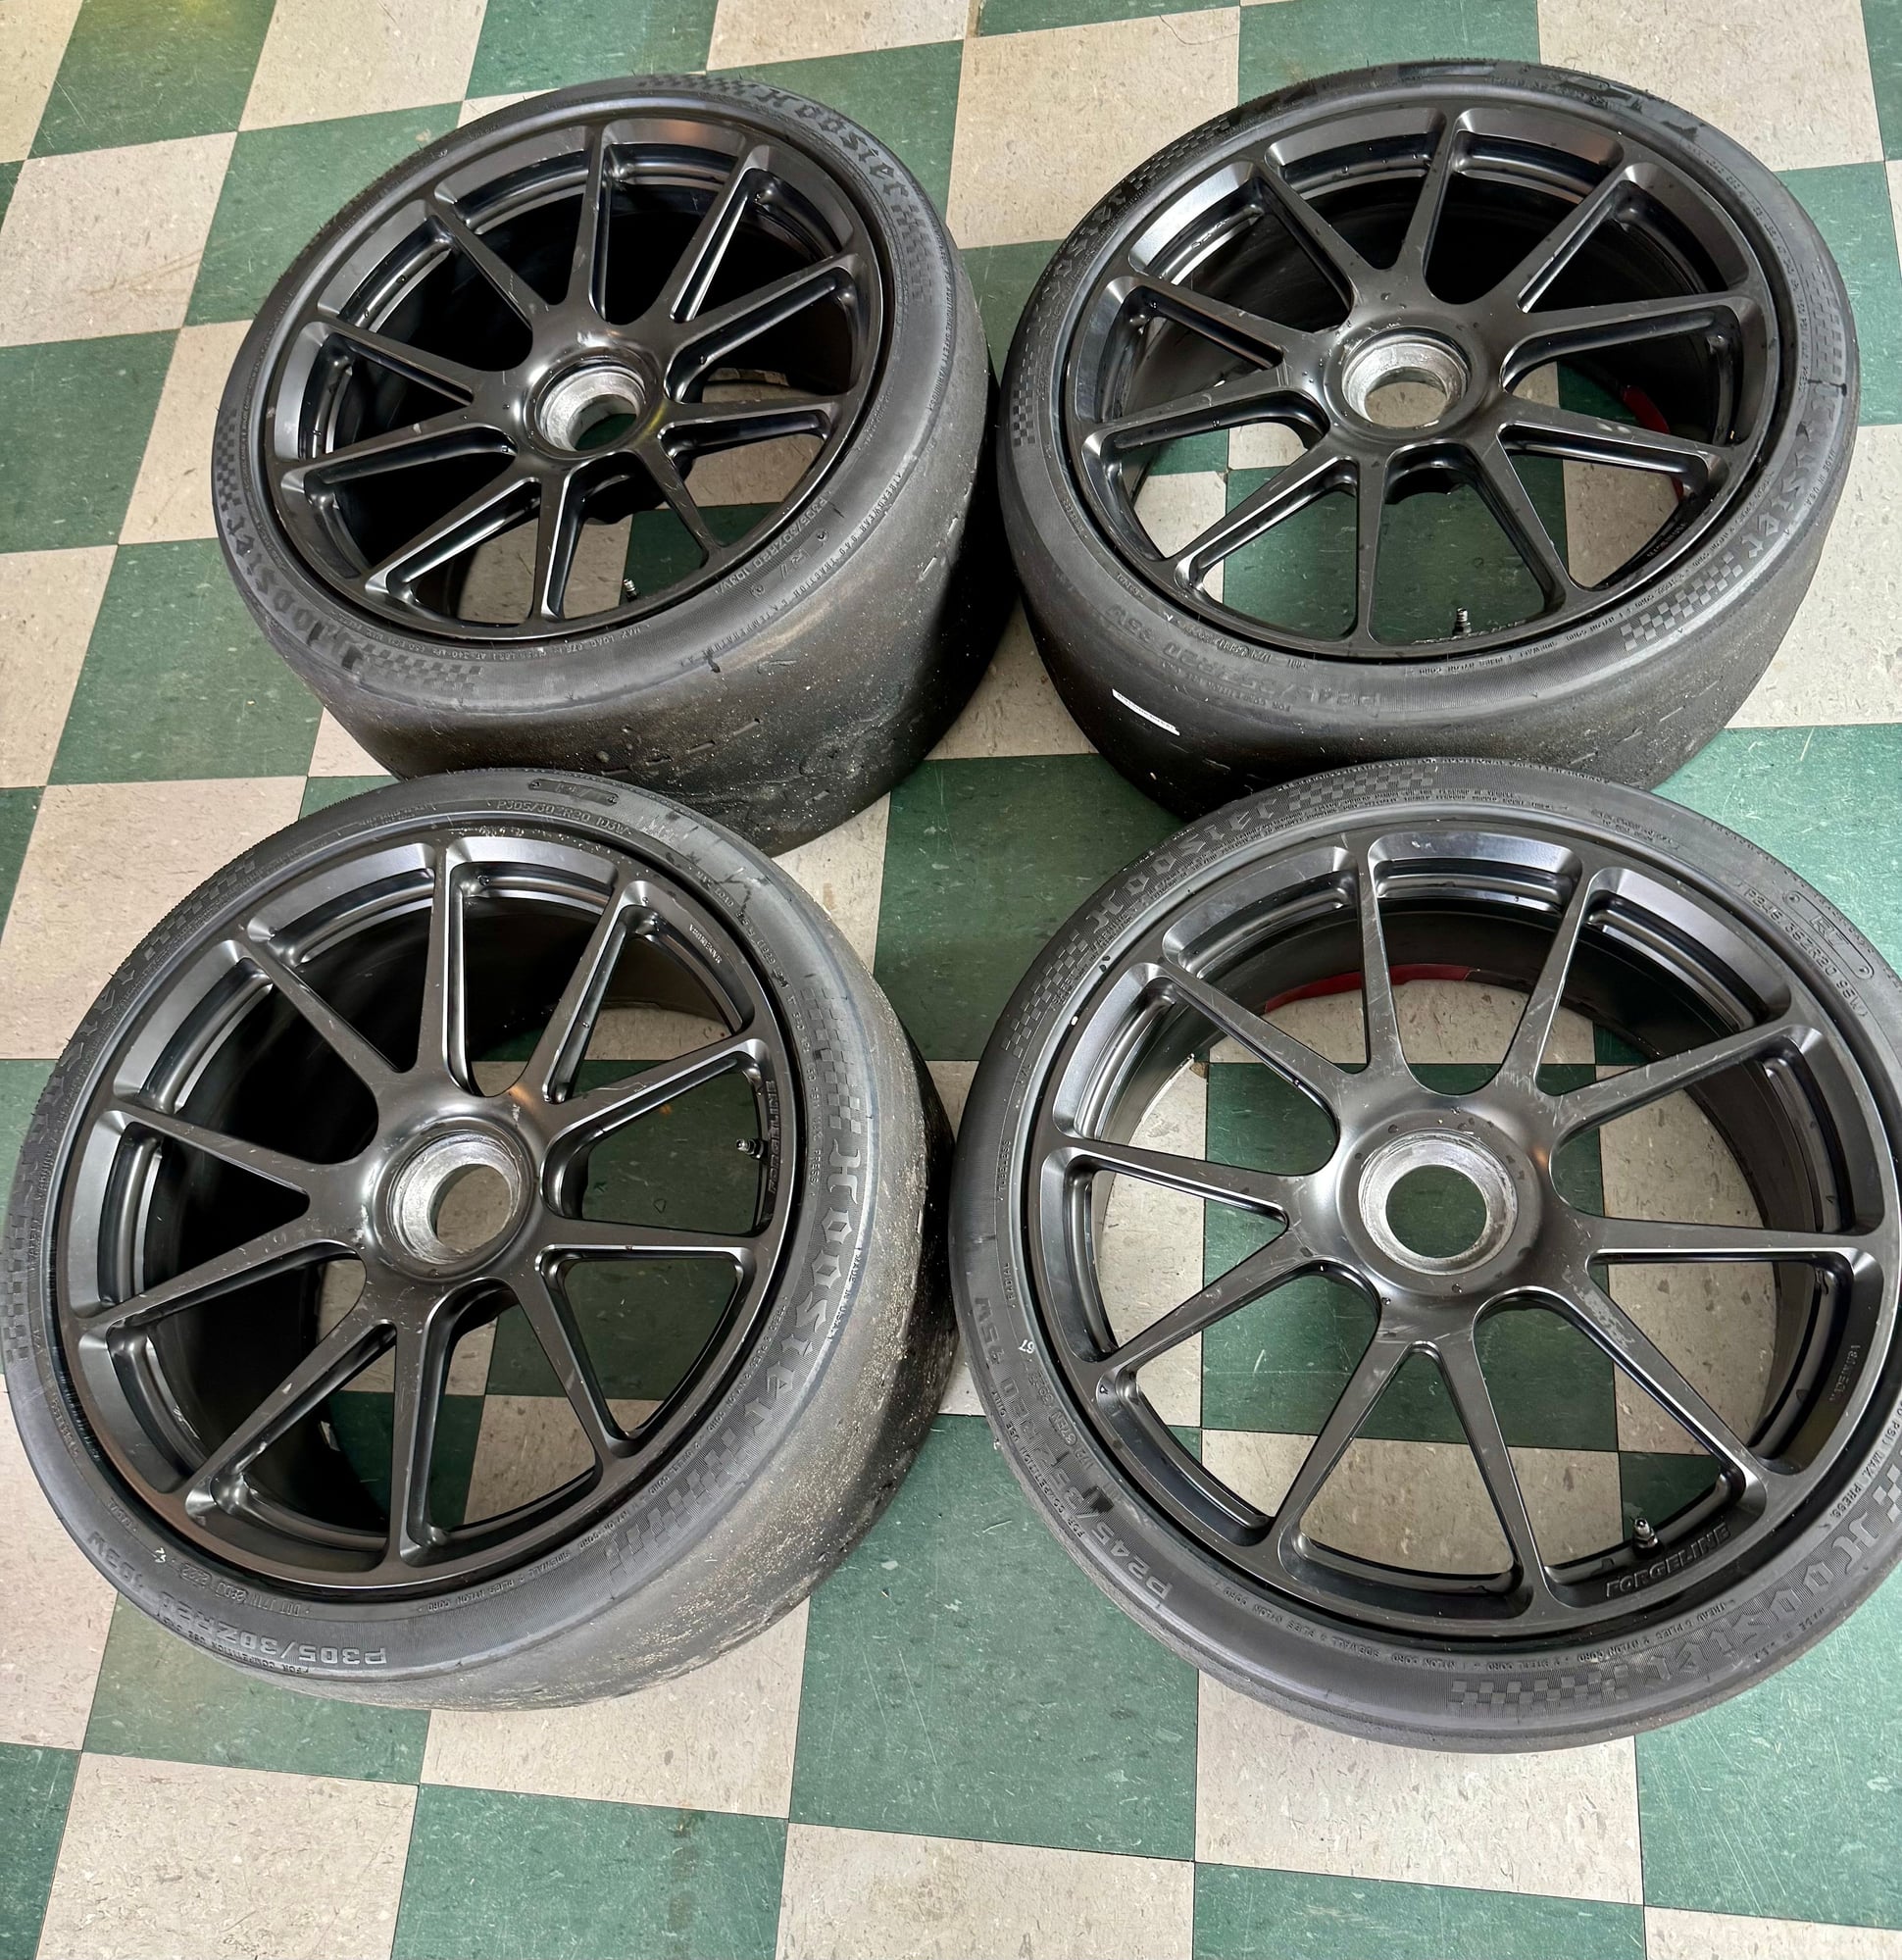 Wheels and Tires/Axles - Forgeline GE1 wheels with Hoosier sicks - Used - Portland, OR 97080, United States